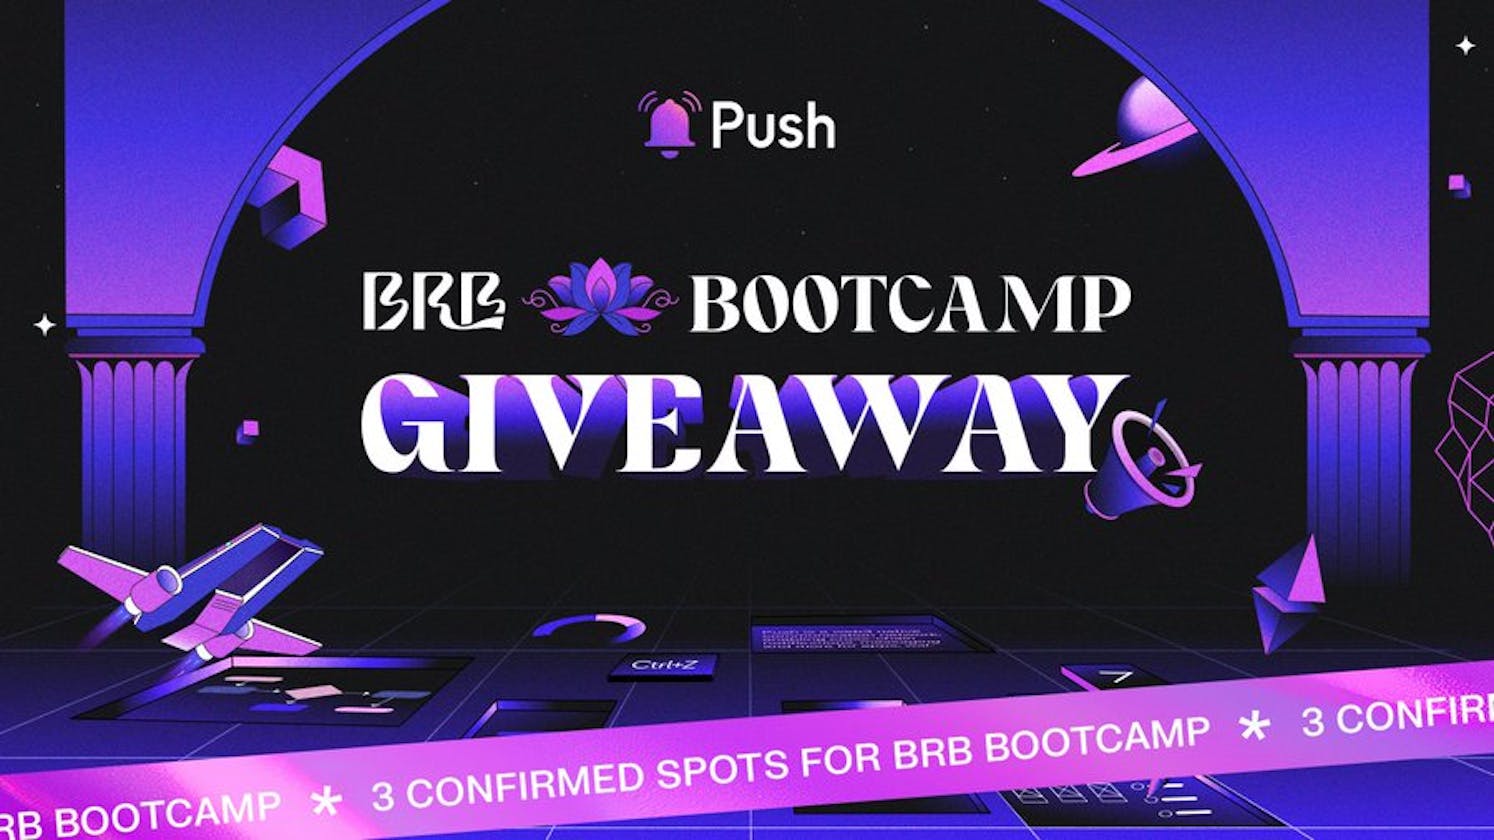 A Deep Dive into the PUSH BRB Bootcamp